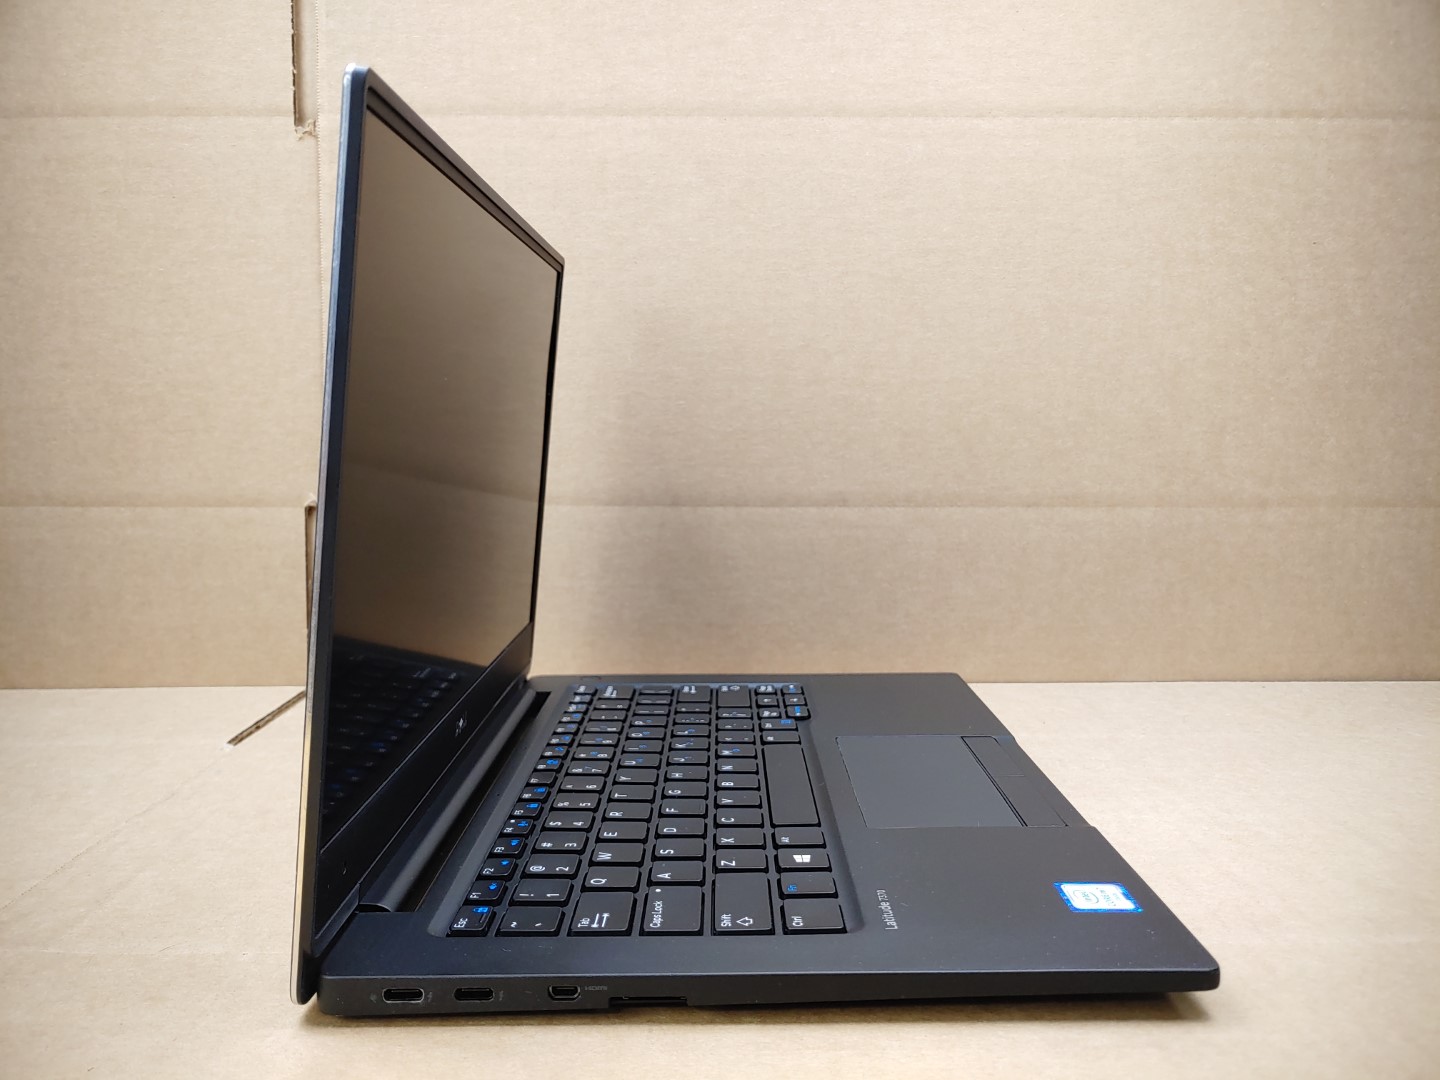 we have added actual images to this listing of the Dell Latitude you would receive. **NO POWER ADAPTER / NO SSD or HDD/ NO OS/ NO BATTERY or CABLE**Item Specifics: MPN : Latitude 7370UPC : N/AType : LaptopBrand : DellProduct Line : LatitudeModel : Latitude 7370Operating System : N/AScreen Size : 13.3-inchProcessor Type : Intel Core m7-6Y75 6th GenProcessor Speed : 1.20GHzGraphics Processing Type : Intel(R) Skylake GraphicsMemory : 16GB Hard Drive Capacity : N/A - 1